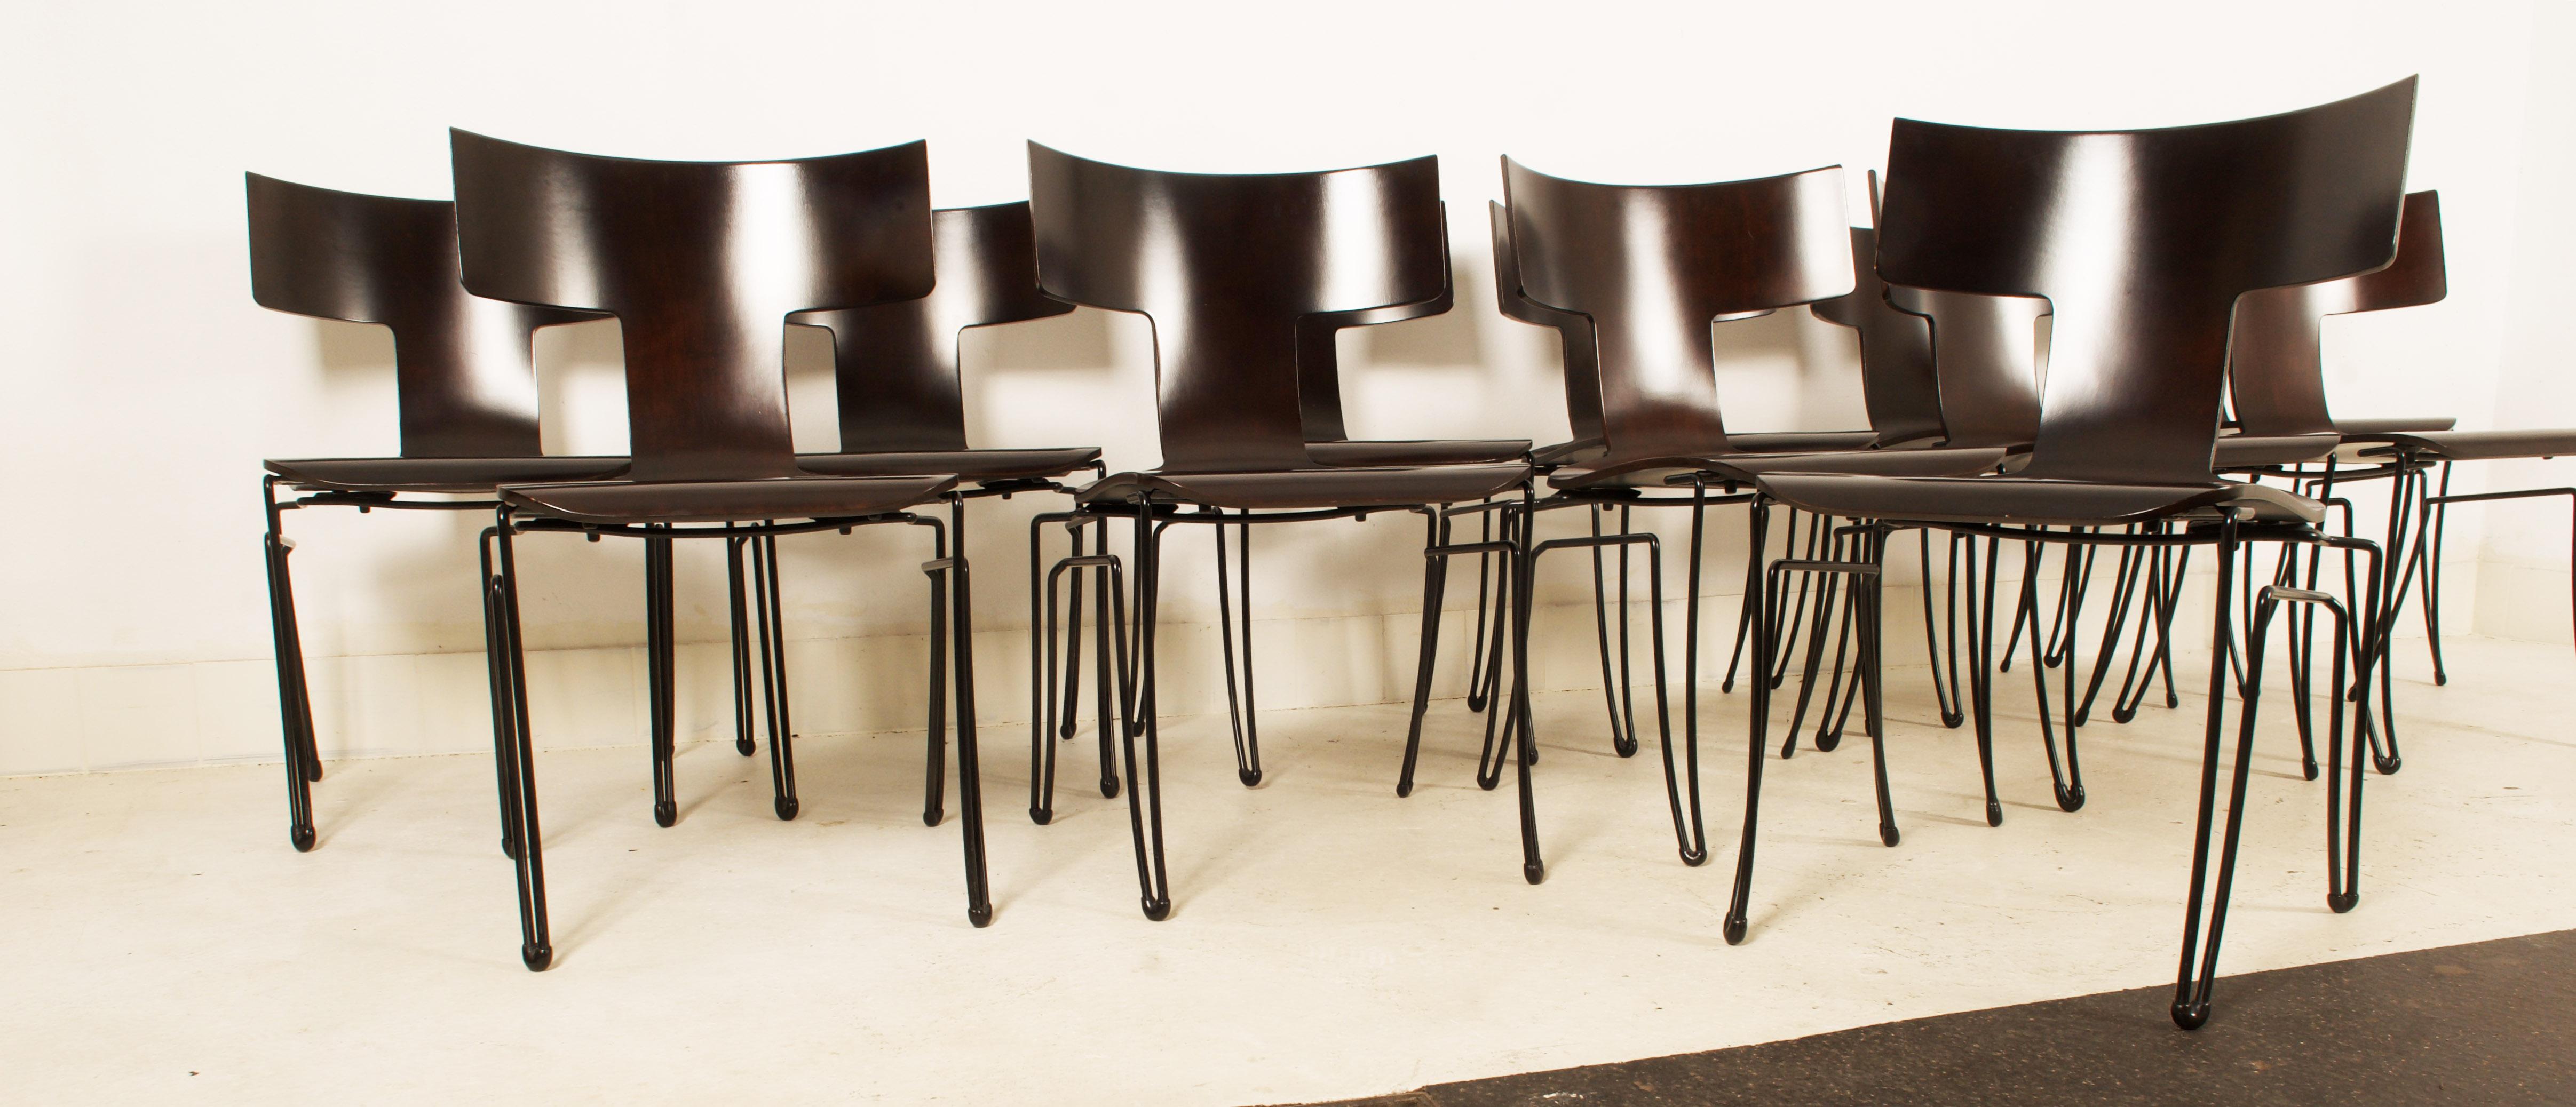 Set of 12 Anziano Dining Chairs by John Hutton for Donghia For Sale 2